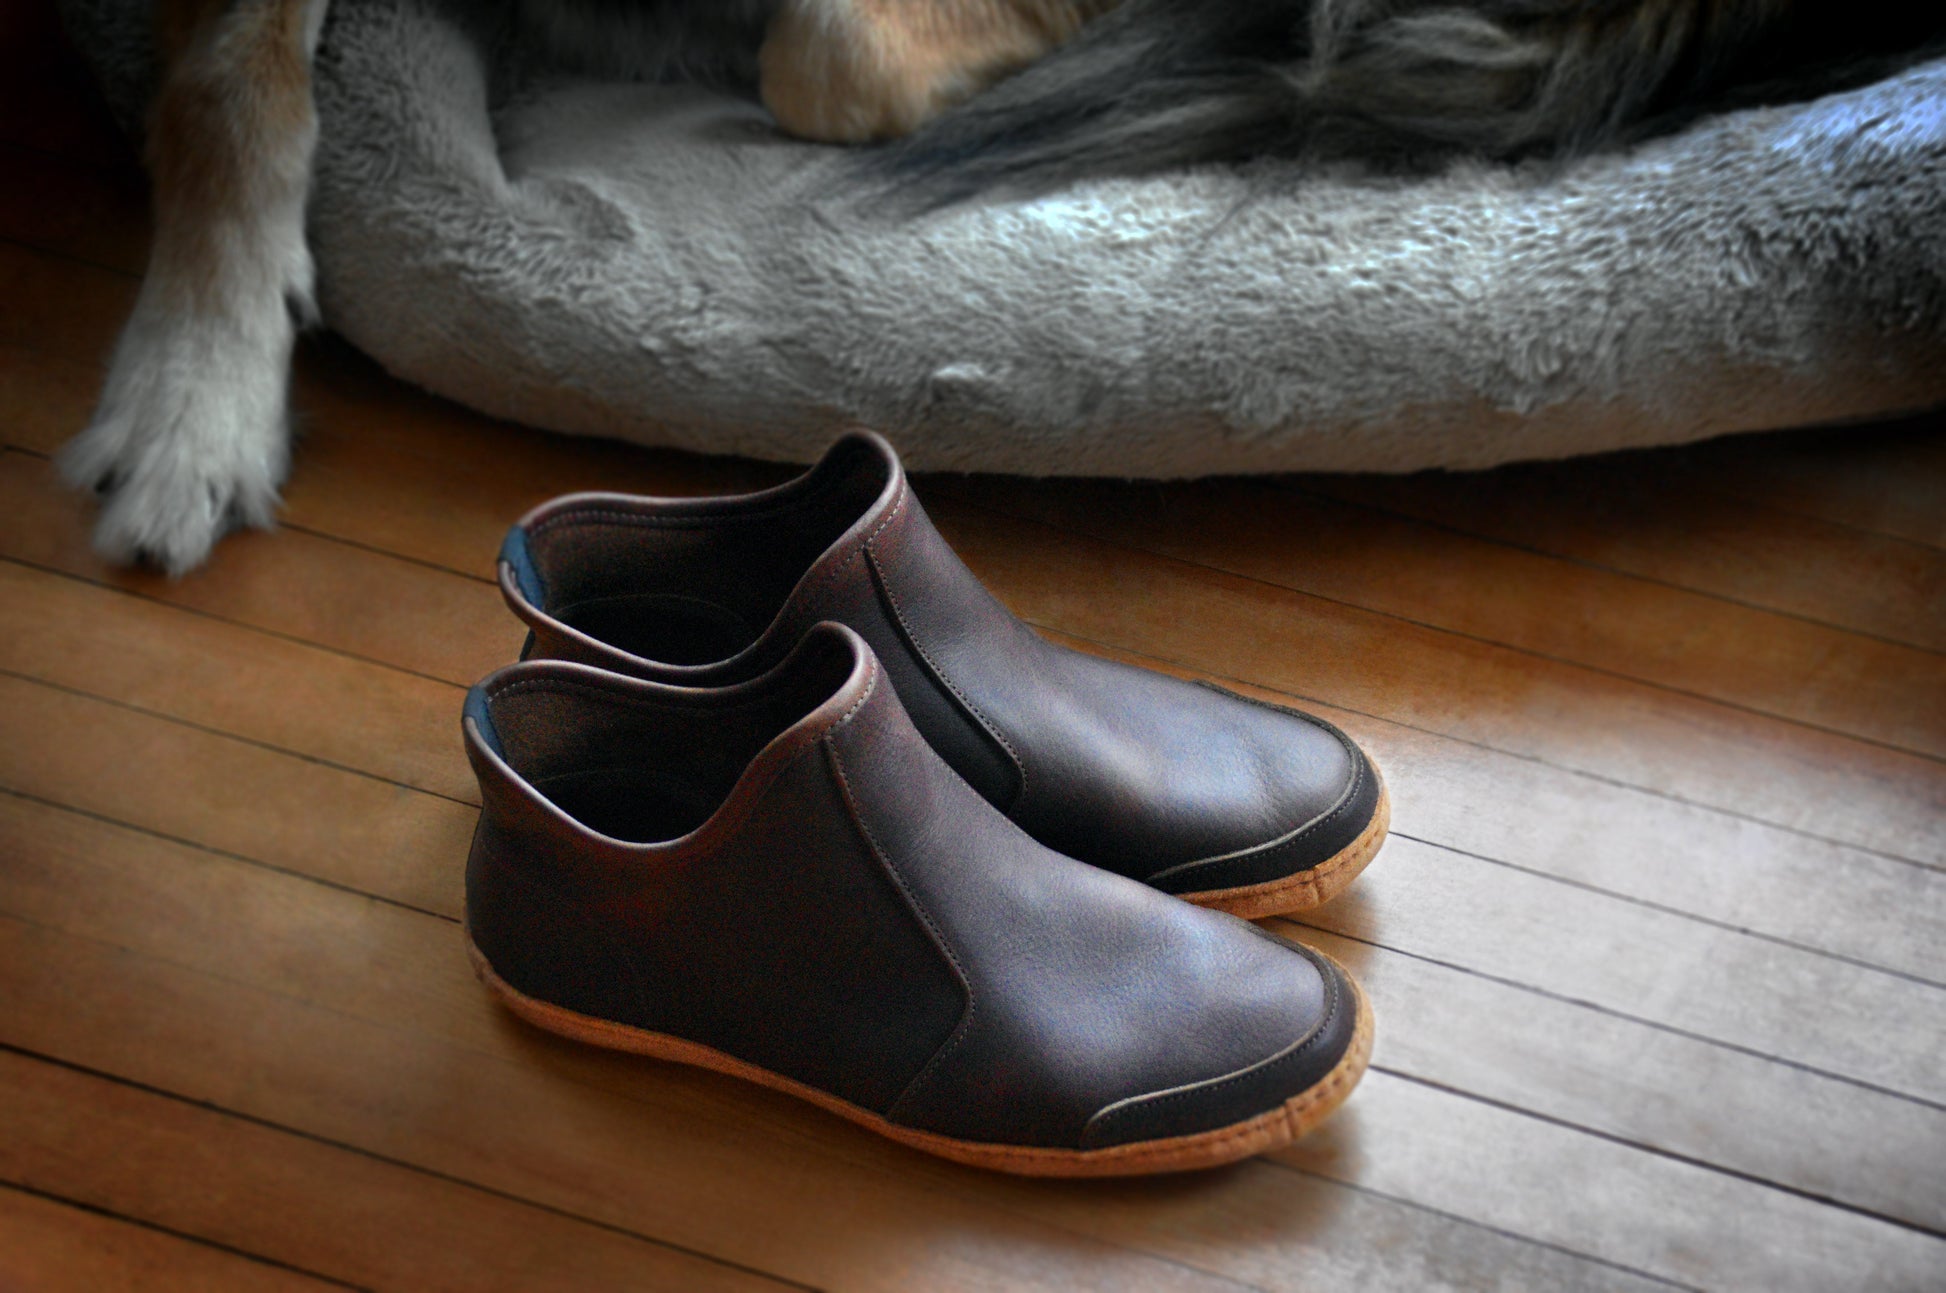 Vermont House Shoes - Hi-Top - Chocolate laying by dog